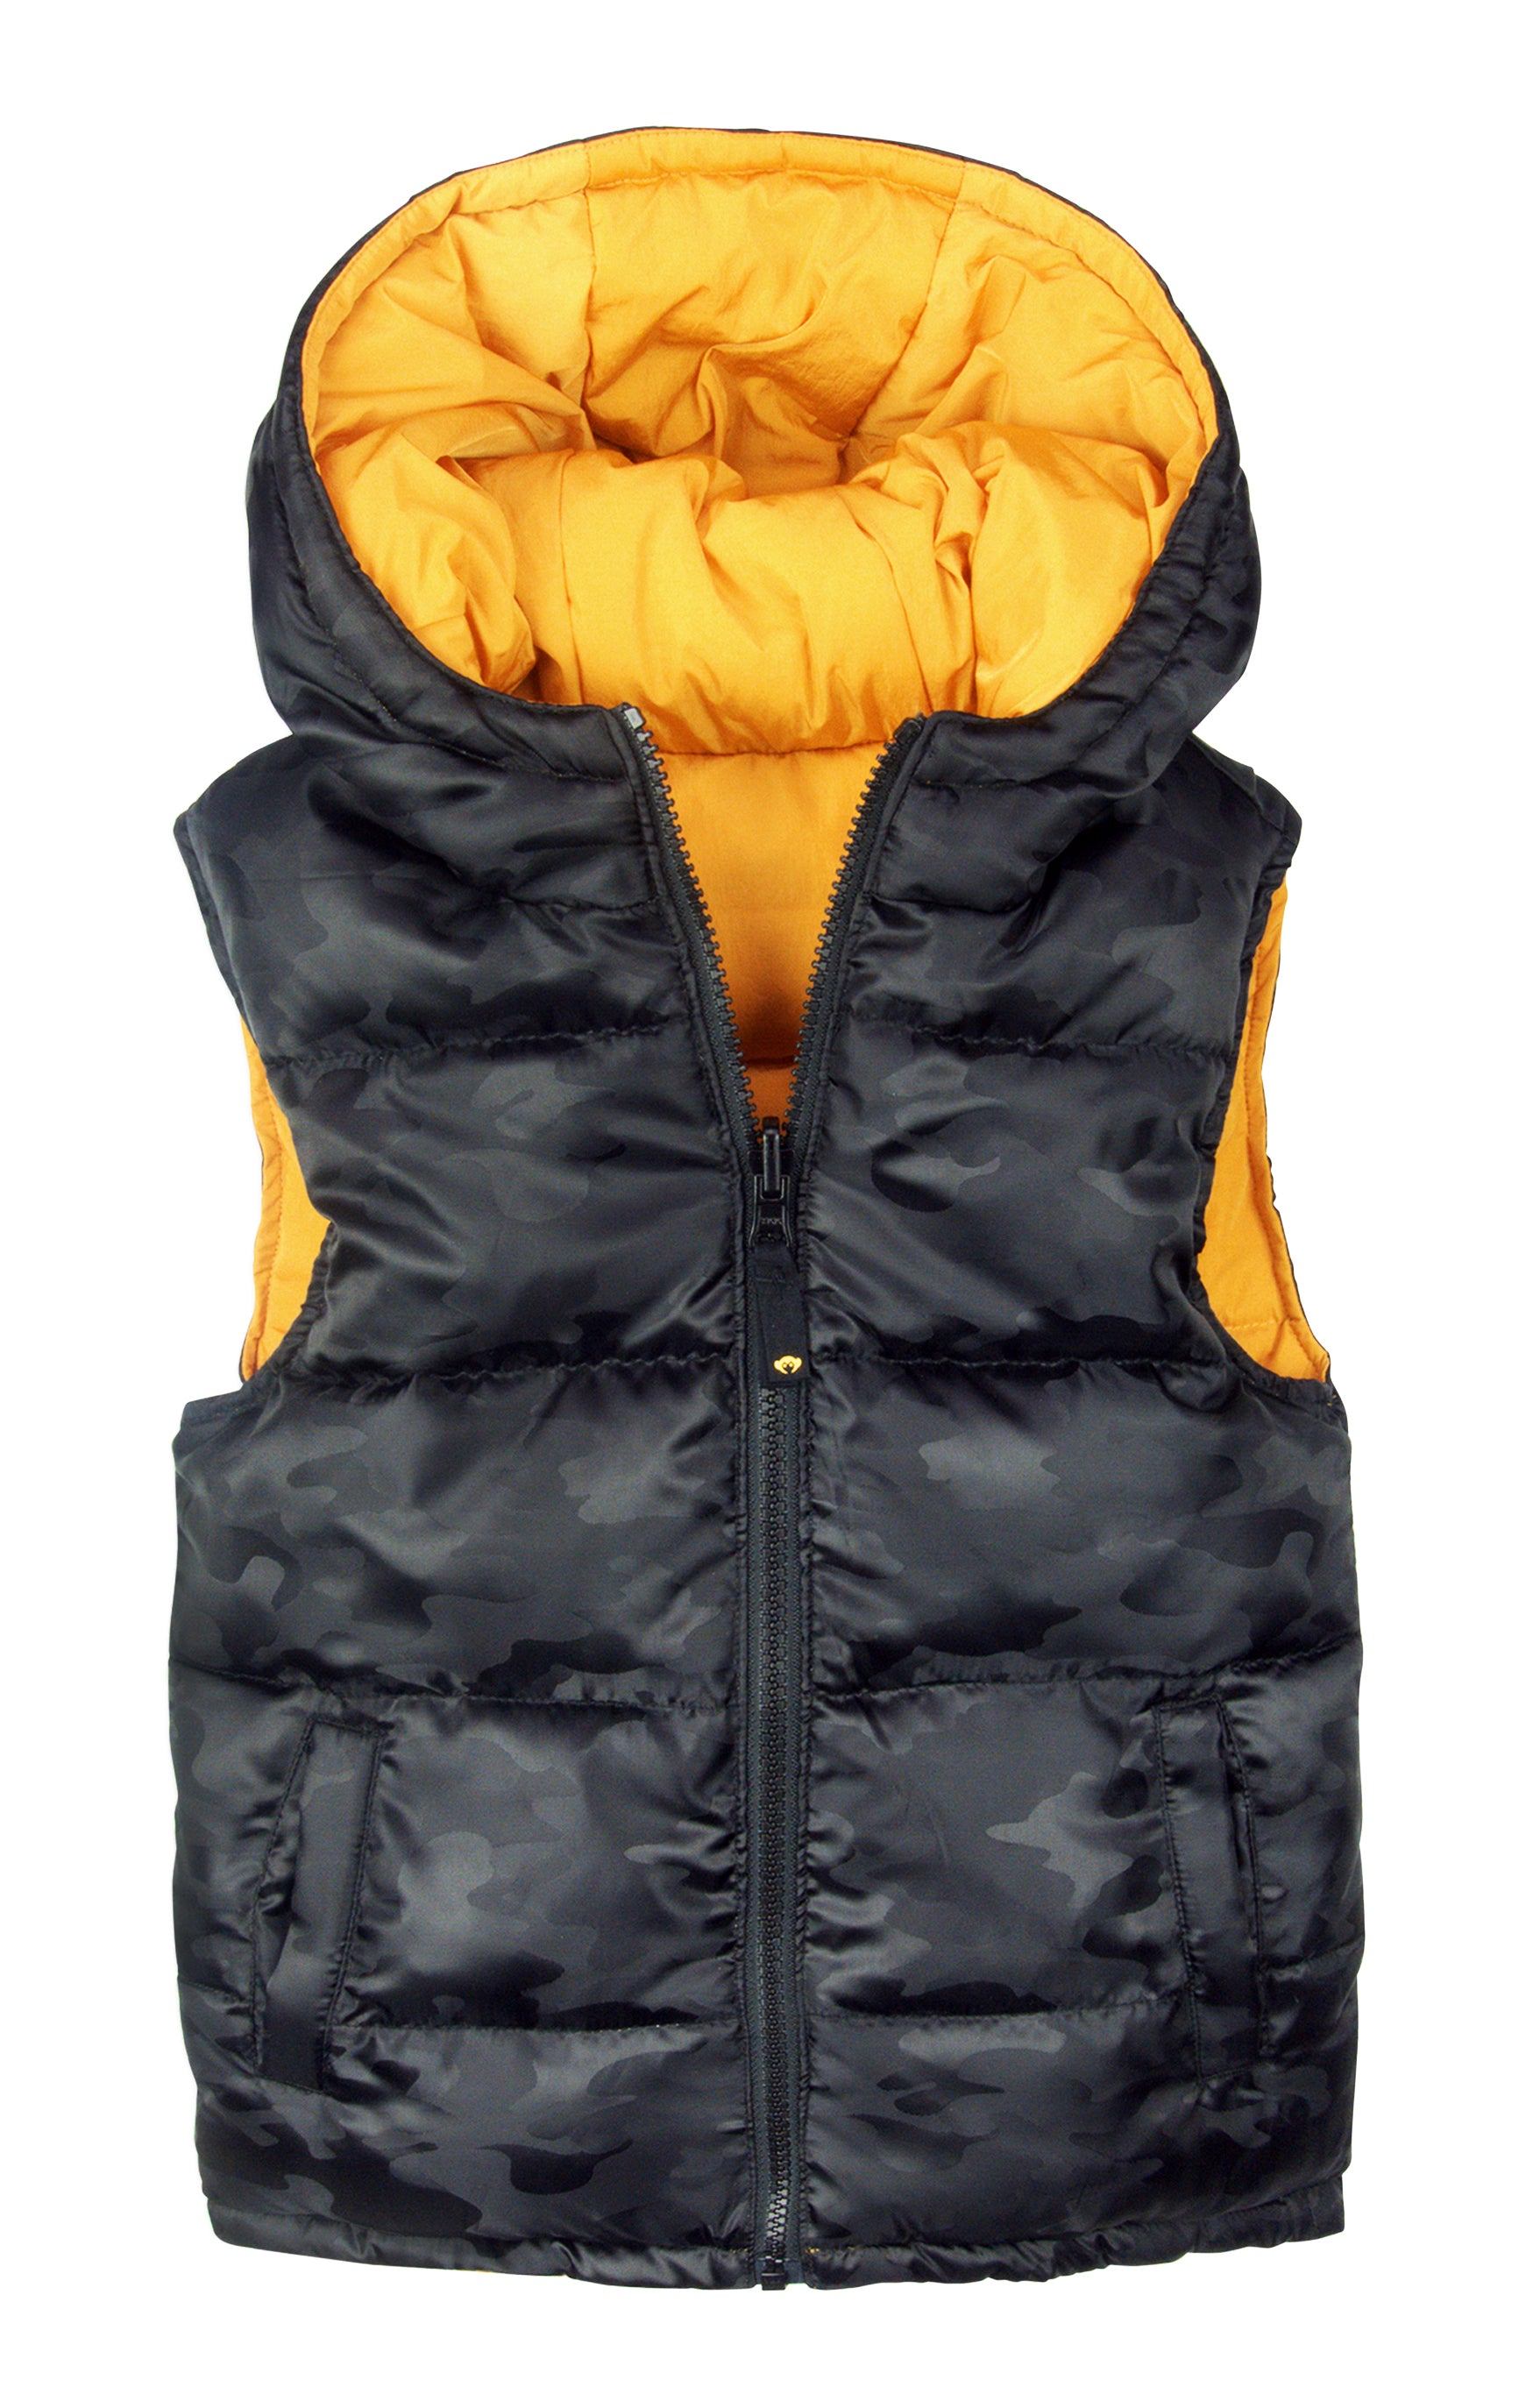 Appaman reversible vest, black camo on  one side, bright yellow on the inside